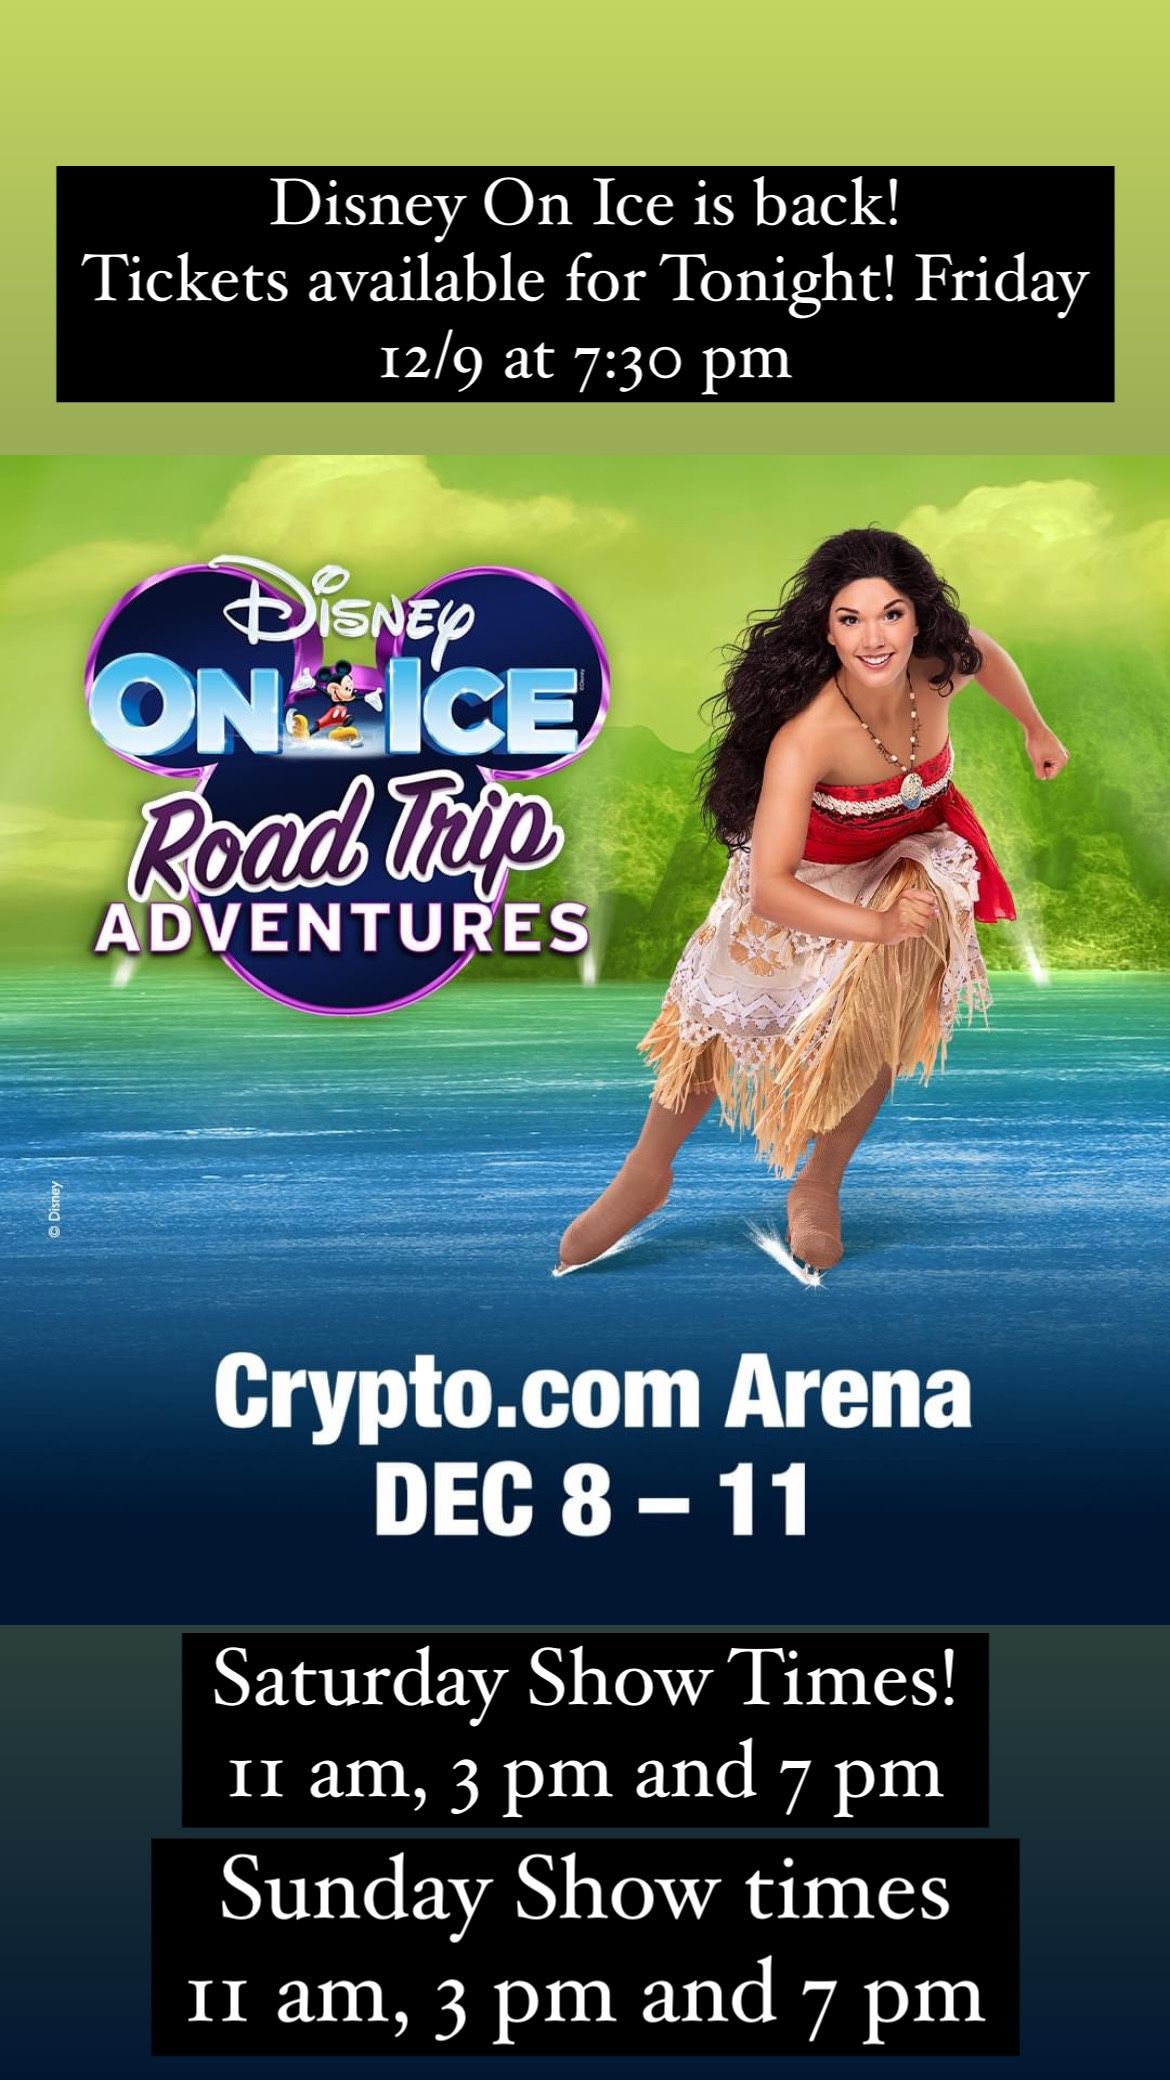 Disney on Ice Tickets For Today Friday!!!